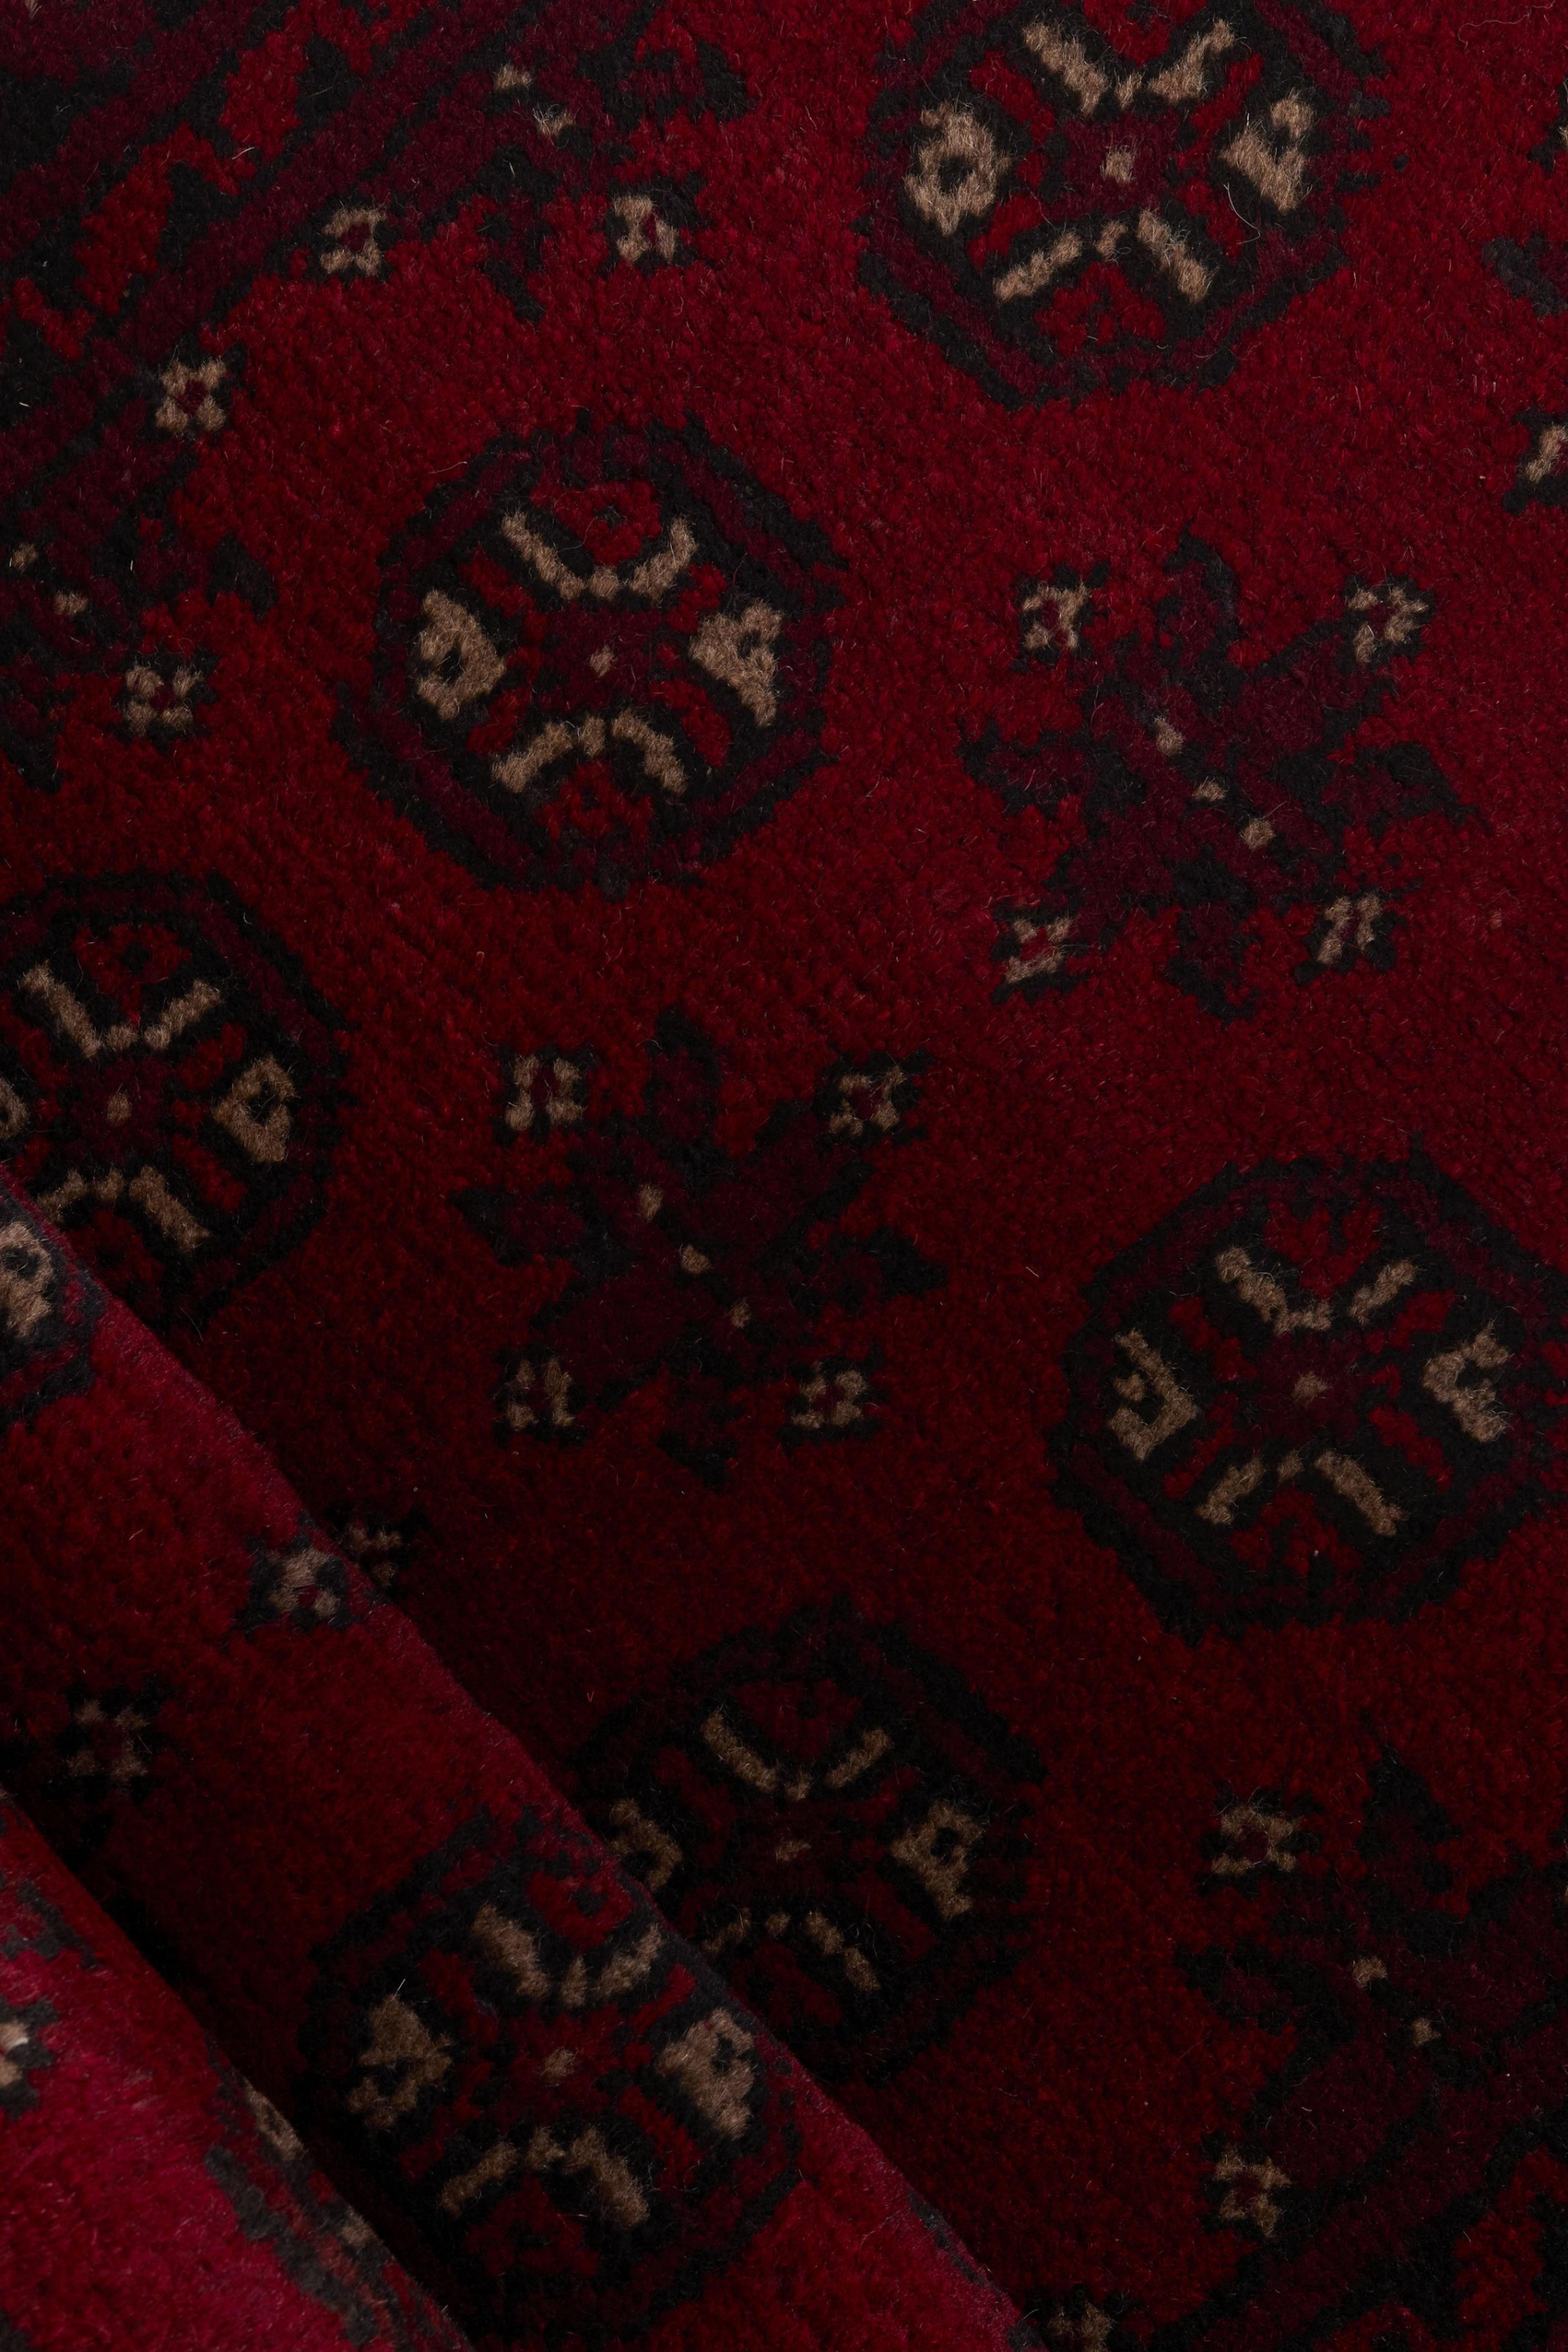 Red oriental wool runner with a traditional elephant's foot pattern